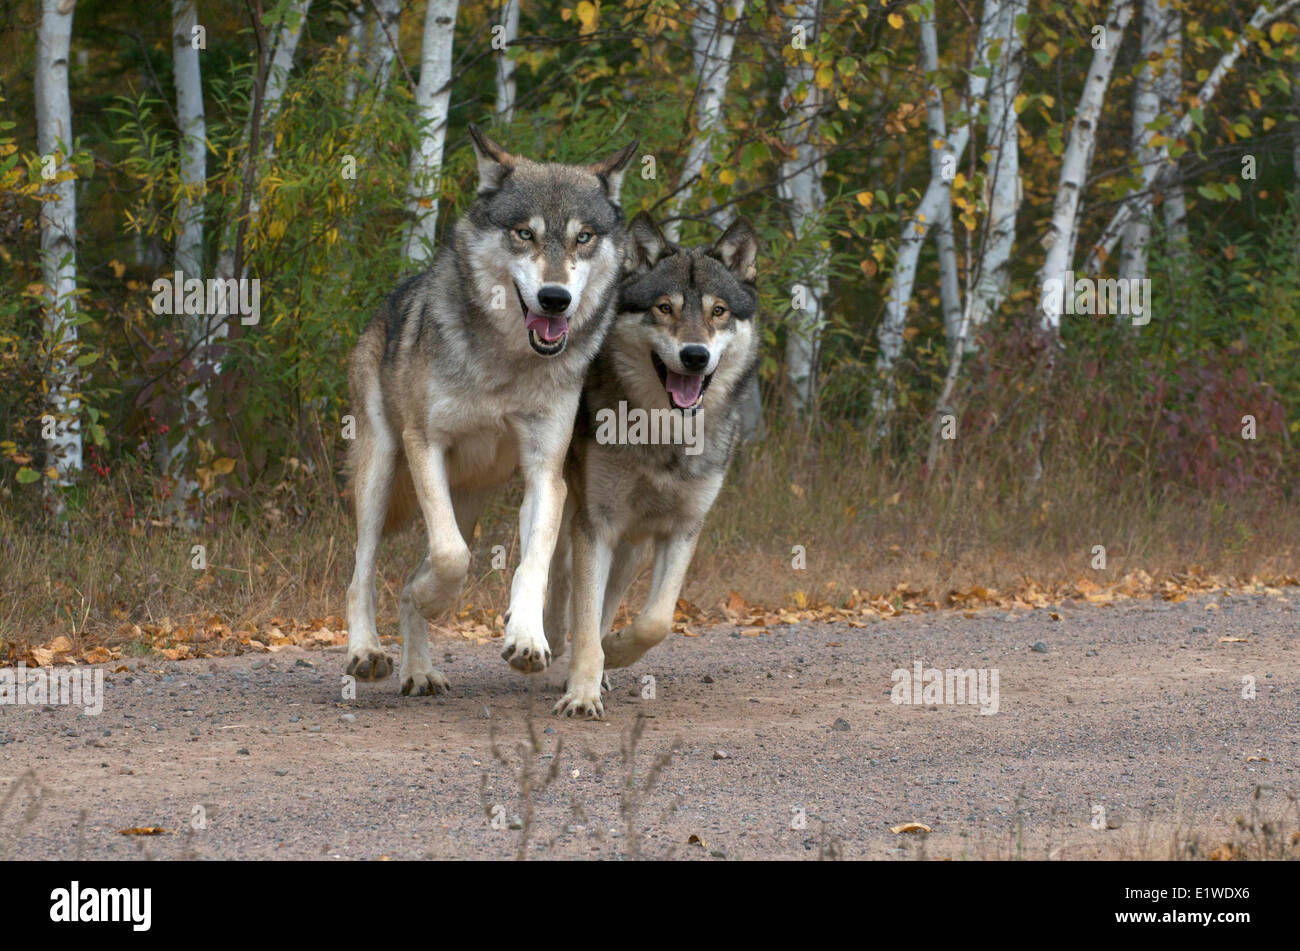 Timber or Gray wolves (Canis lupus), moving at edge of forest, along gravel roadside, Minnesota, United States of America Stock Photo